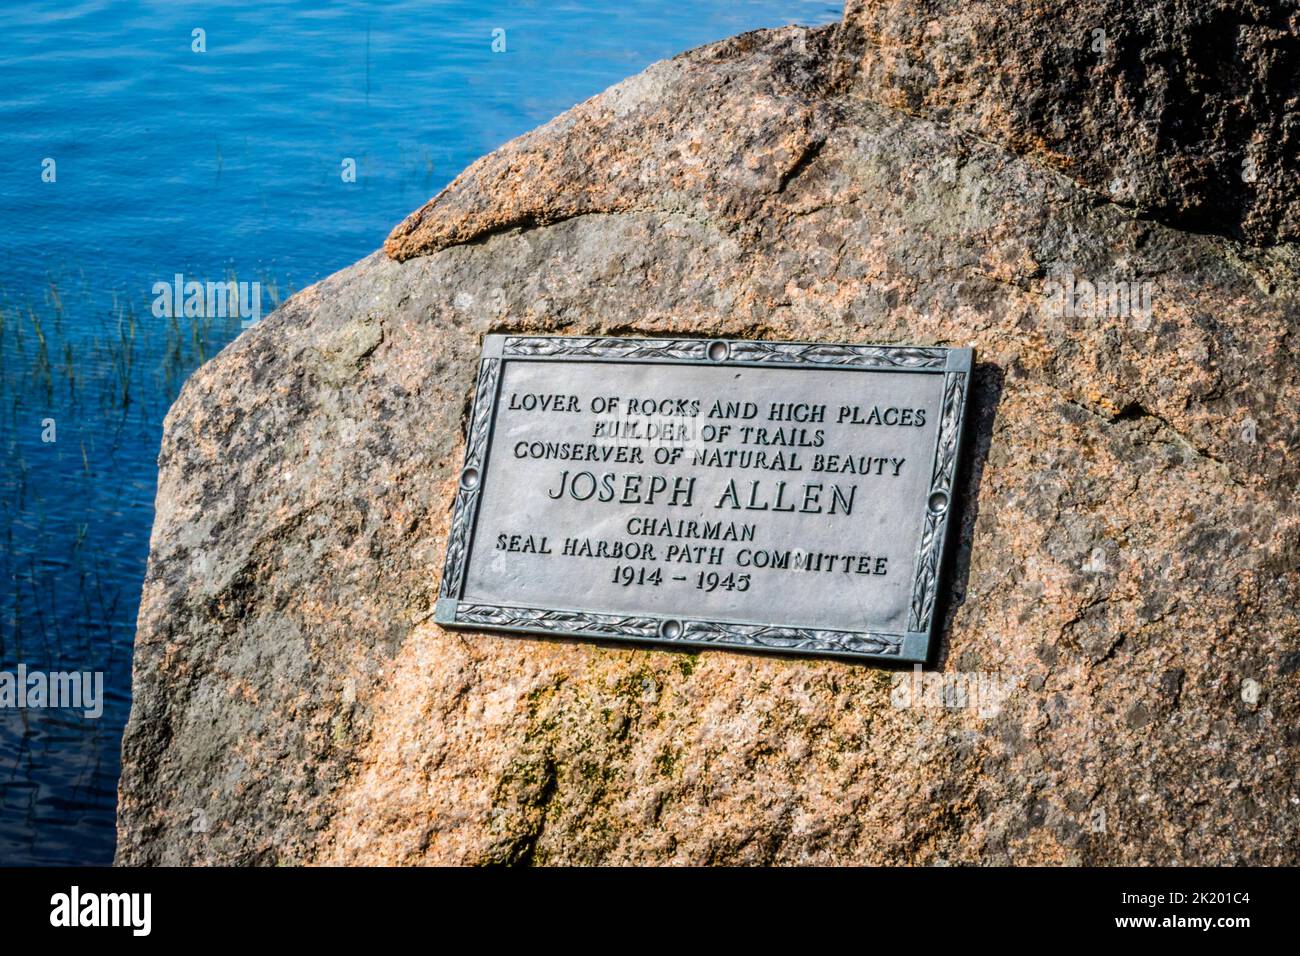 A headstone in Acadia National Park, Maine Stock Photo